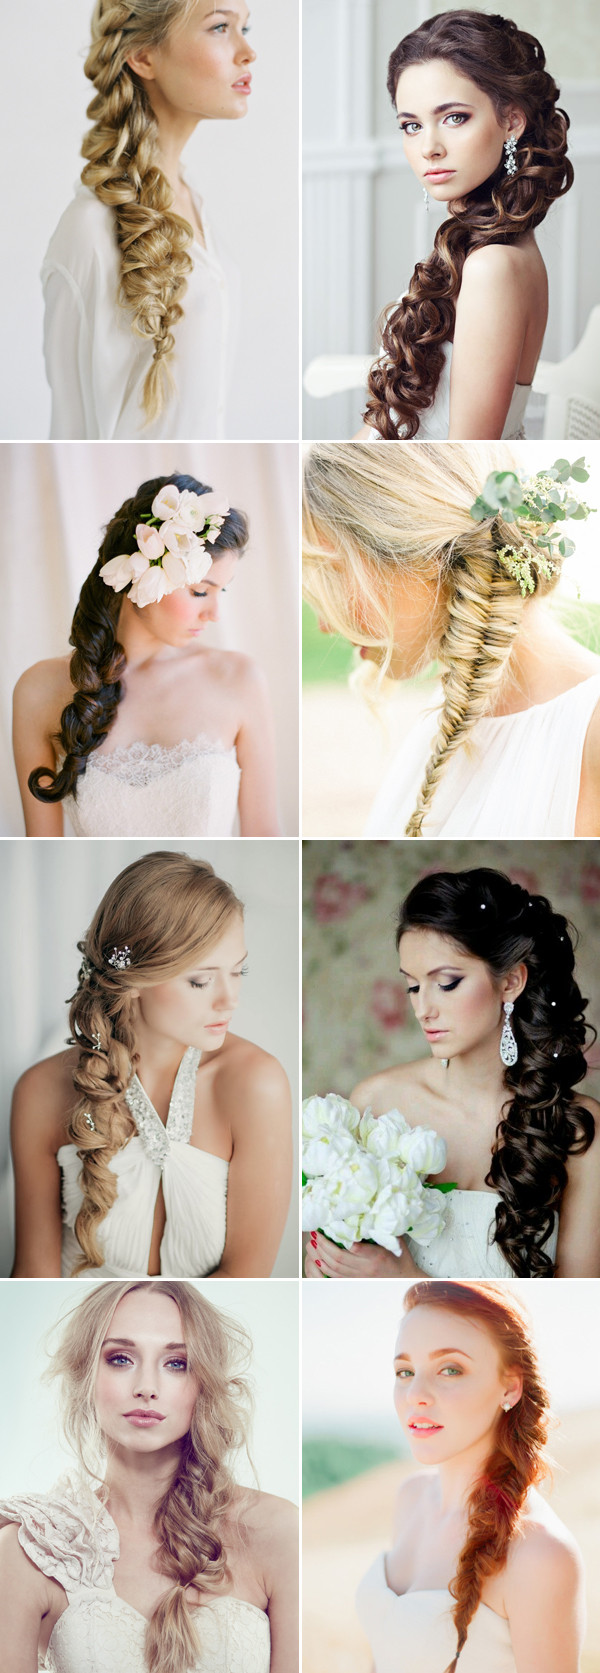 Wedding Hairstyles Side Swept
 42 Steal Worthy Wedding Hairstyles for Long Hair